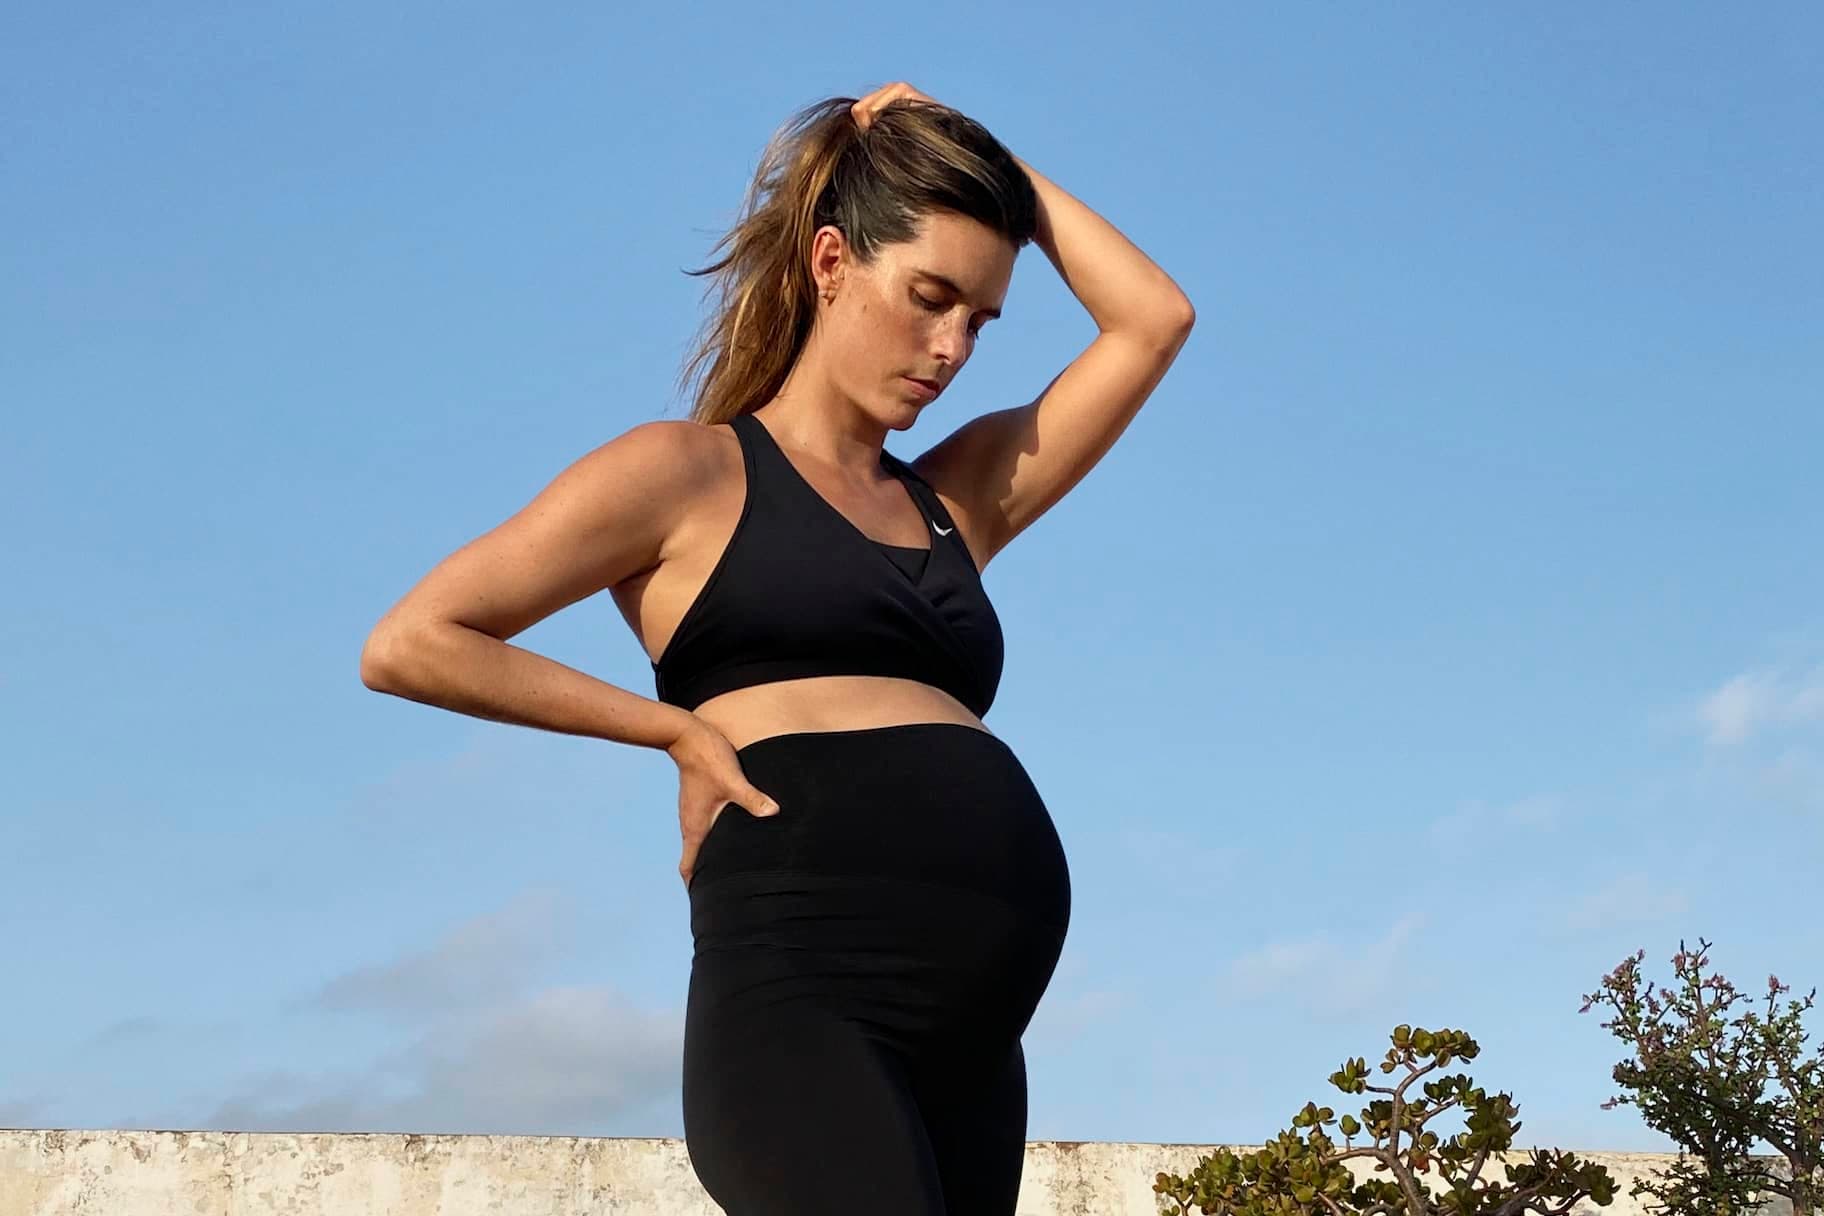 Maternity Yoga Clothes: What to Wear When Pregnant. Nike IL